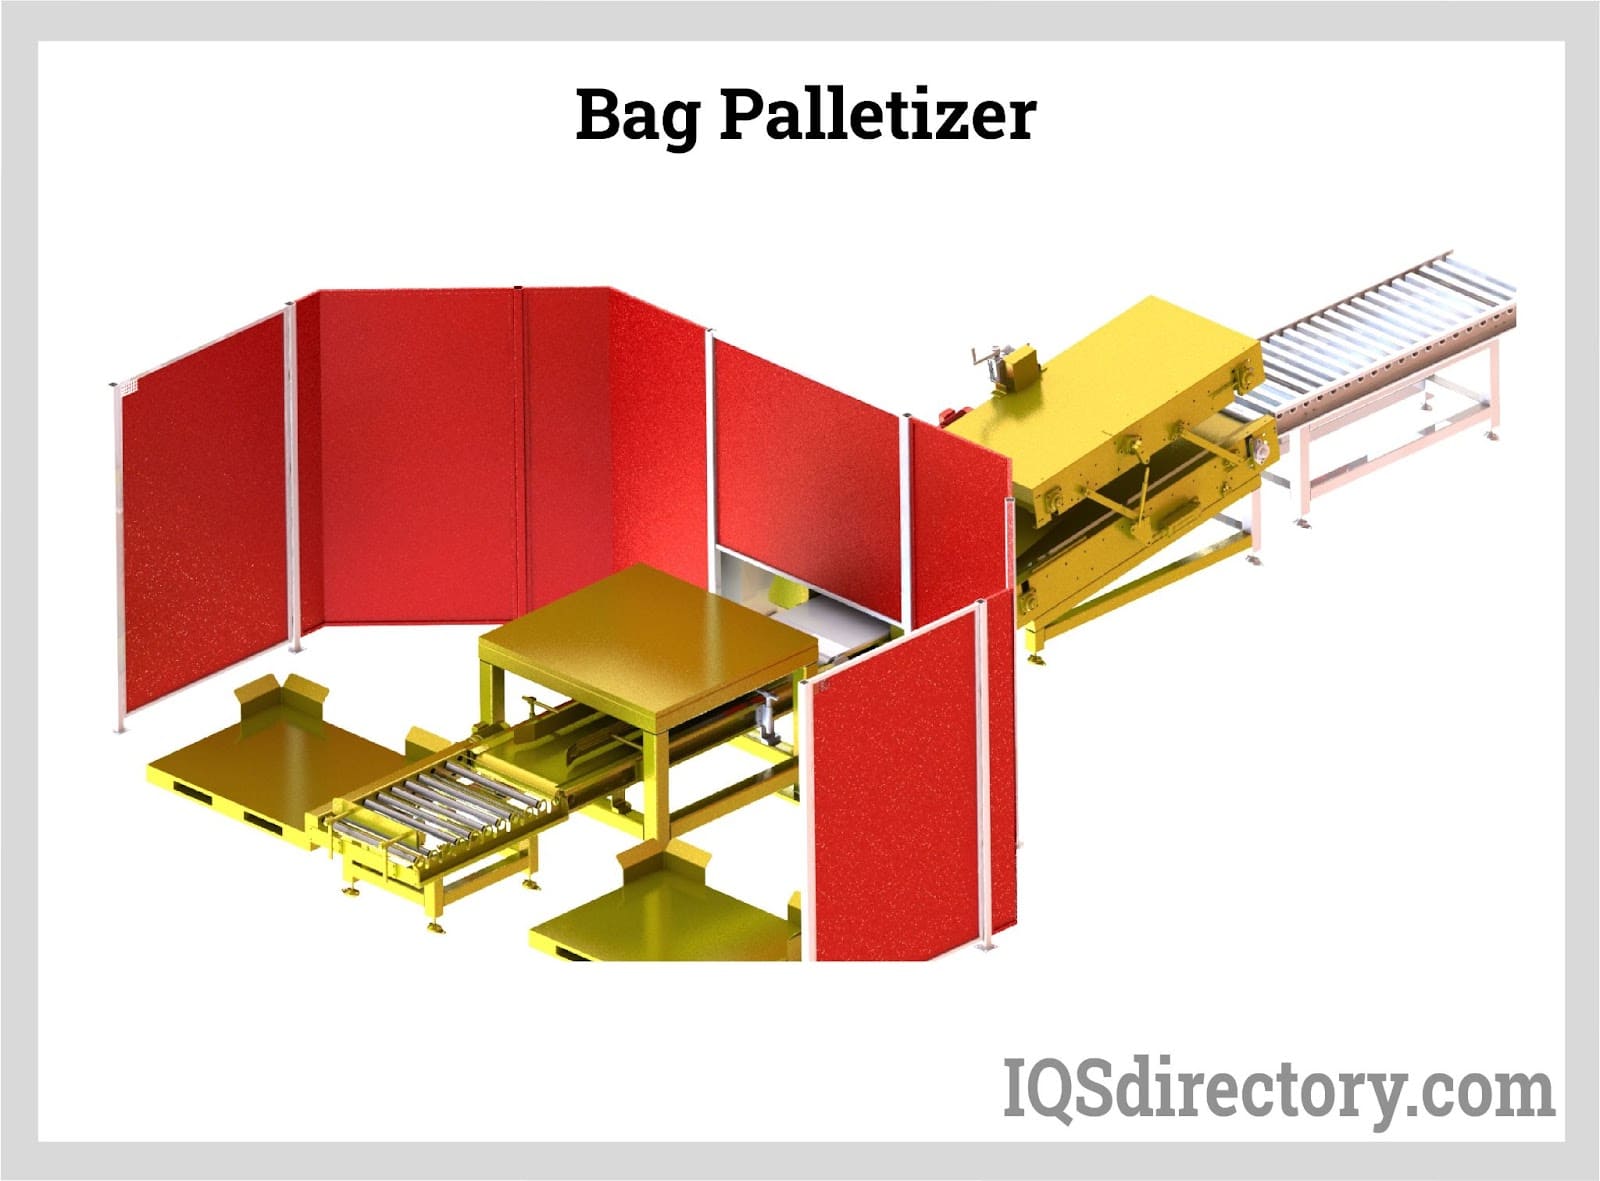 Bag Palletizing & Wrapping Systems Machines from STB Engineering